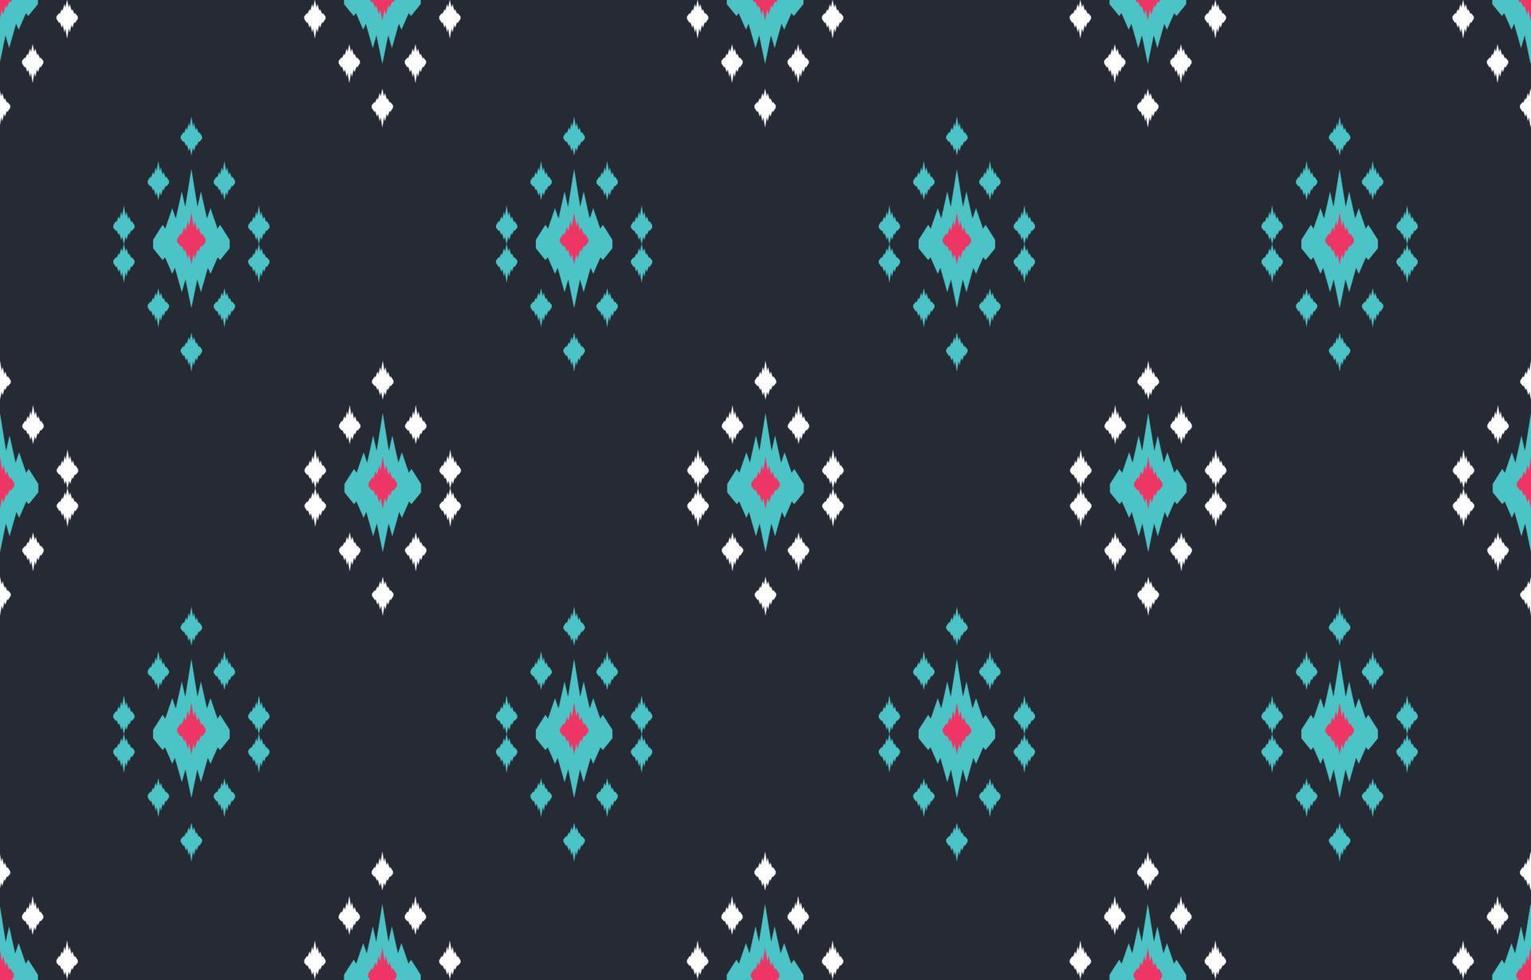 Ethnic abstract background. Seamless pattern in tribal, folk embroidery, and Mexican style. Aztec geometric art ornament print.Design for carpet, wallpaper, clothing, wrapping, fabric, cover, textile vector